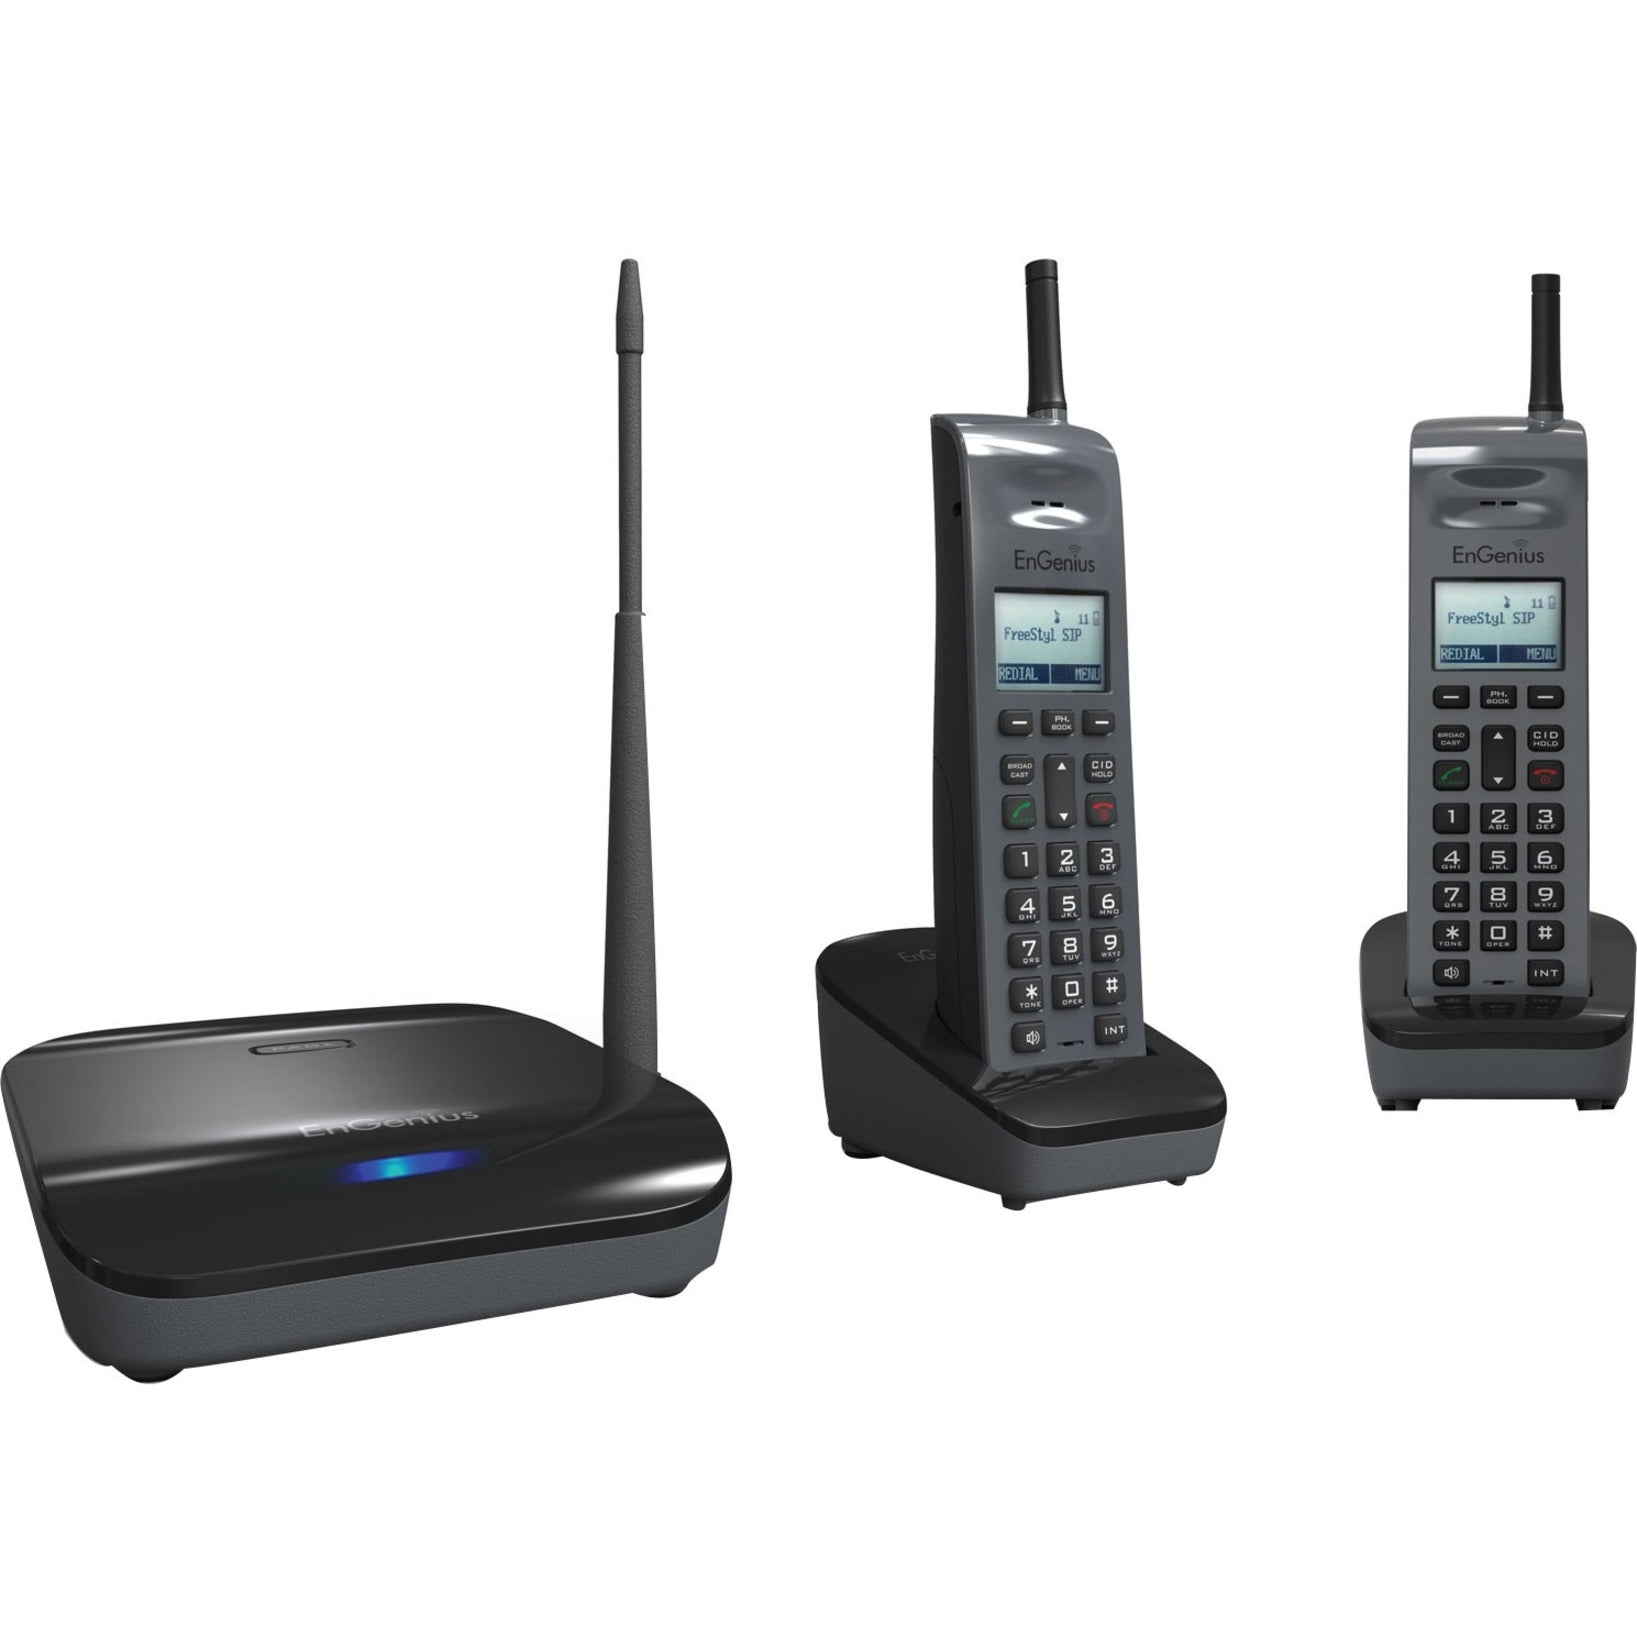 EnGenius FREESTYL SIP2 IP Phone, Cordless Handsets Included, VoIP Technology